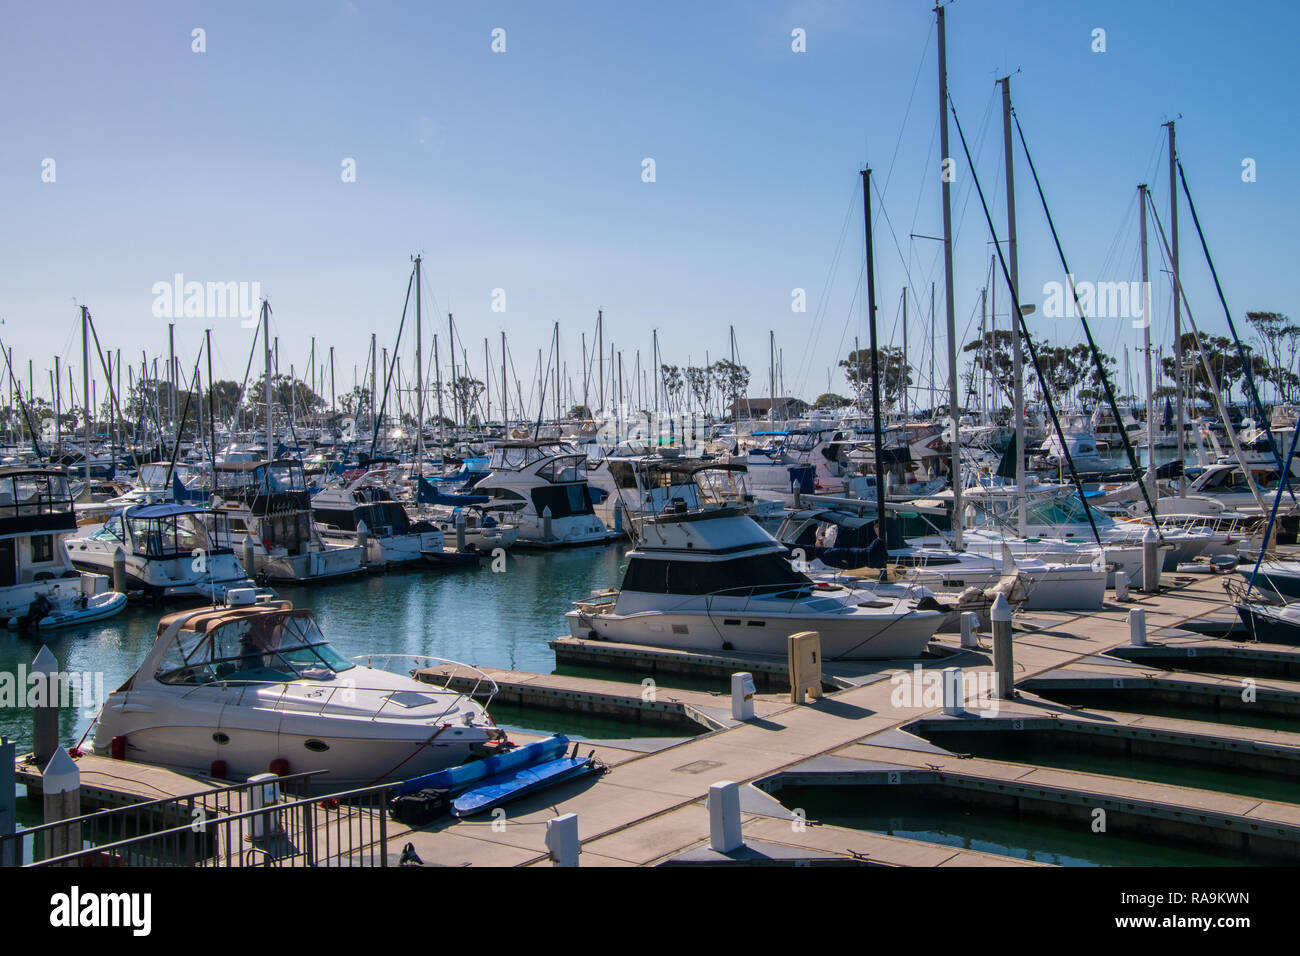 Small marina with deep blue water and many sail and power boats docked in slips Stock Photo